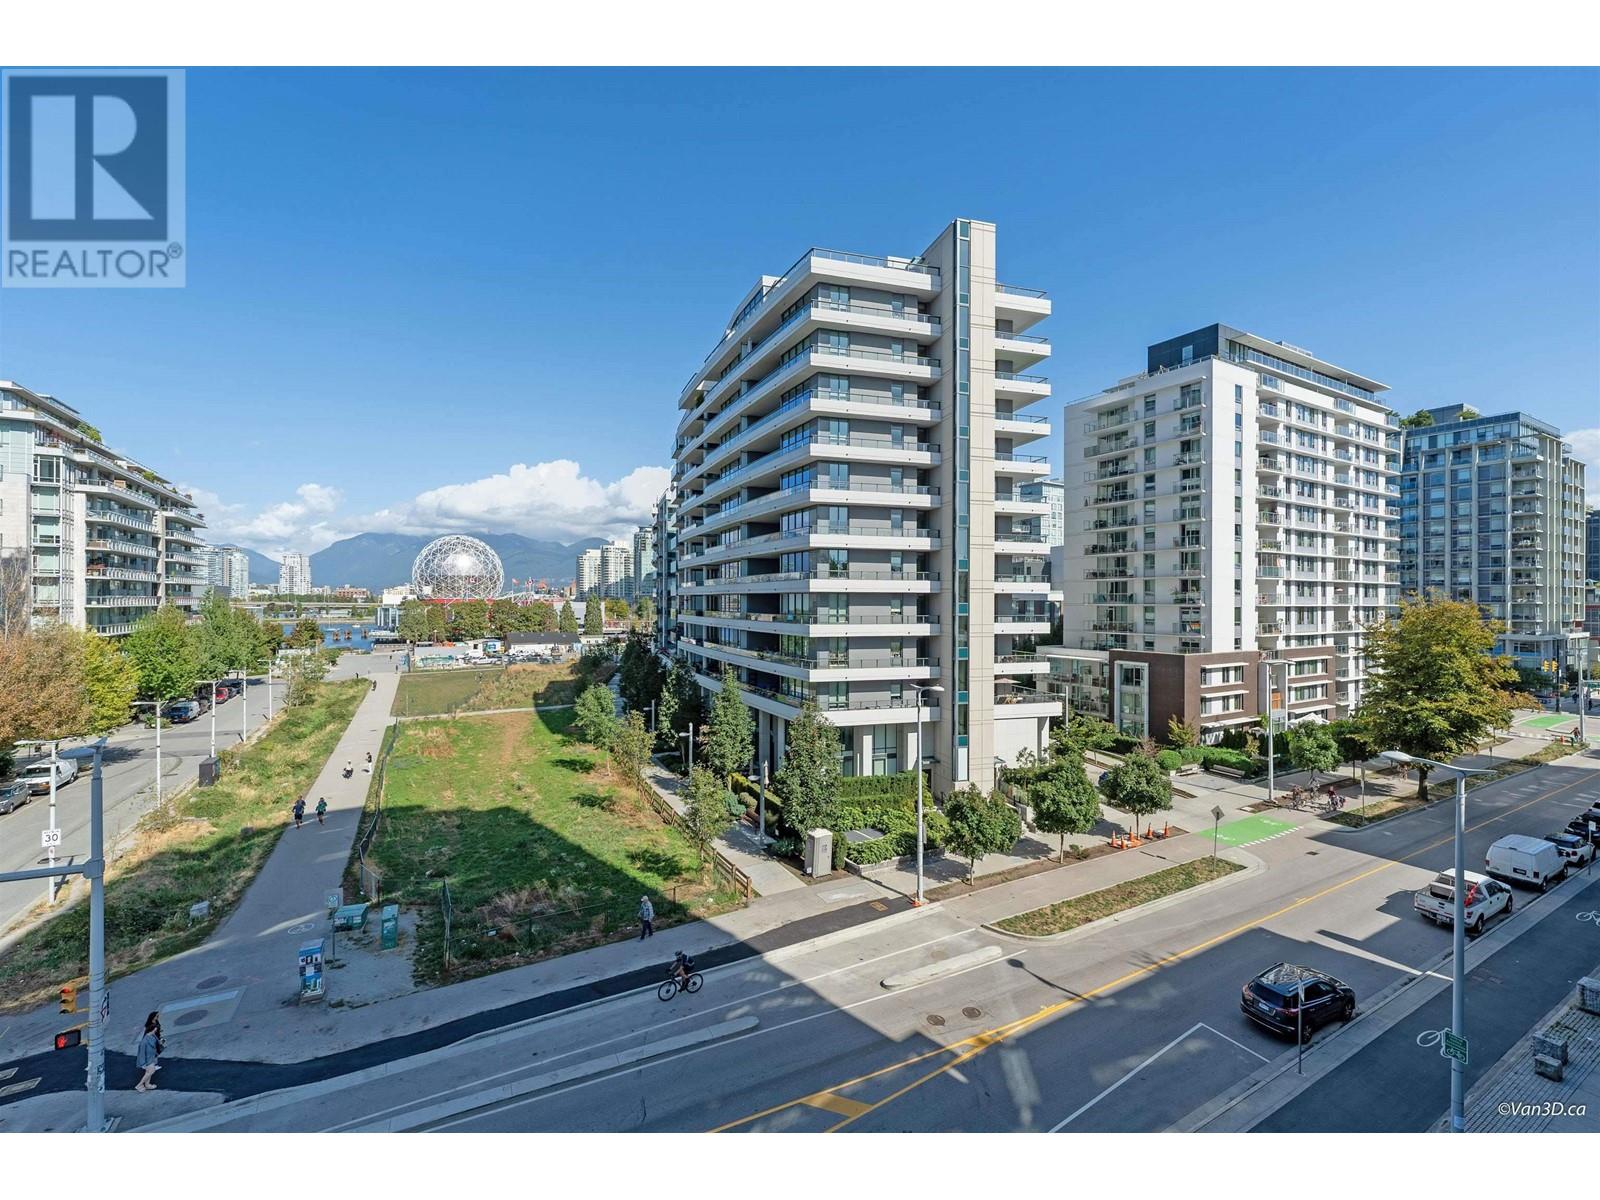 Listing Picture 4 of 20 : 506 1708 ONTARIO STREET, Vancouver / 溫哥華 - 魯藝地產 Yvonne Lu Group - MLS Medallion Club Member